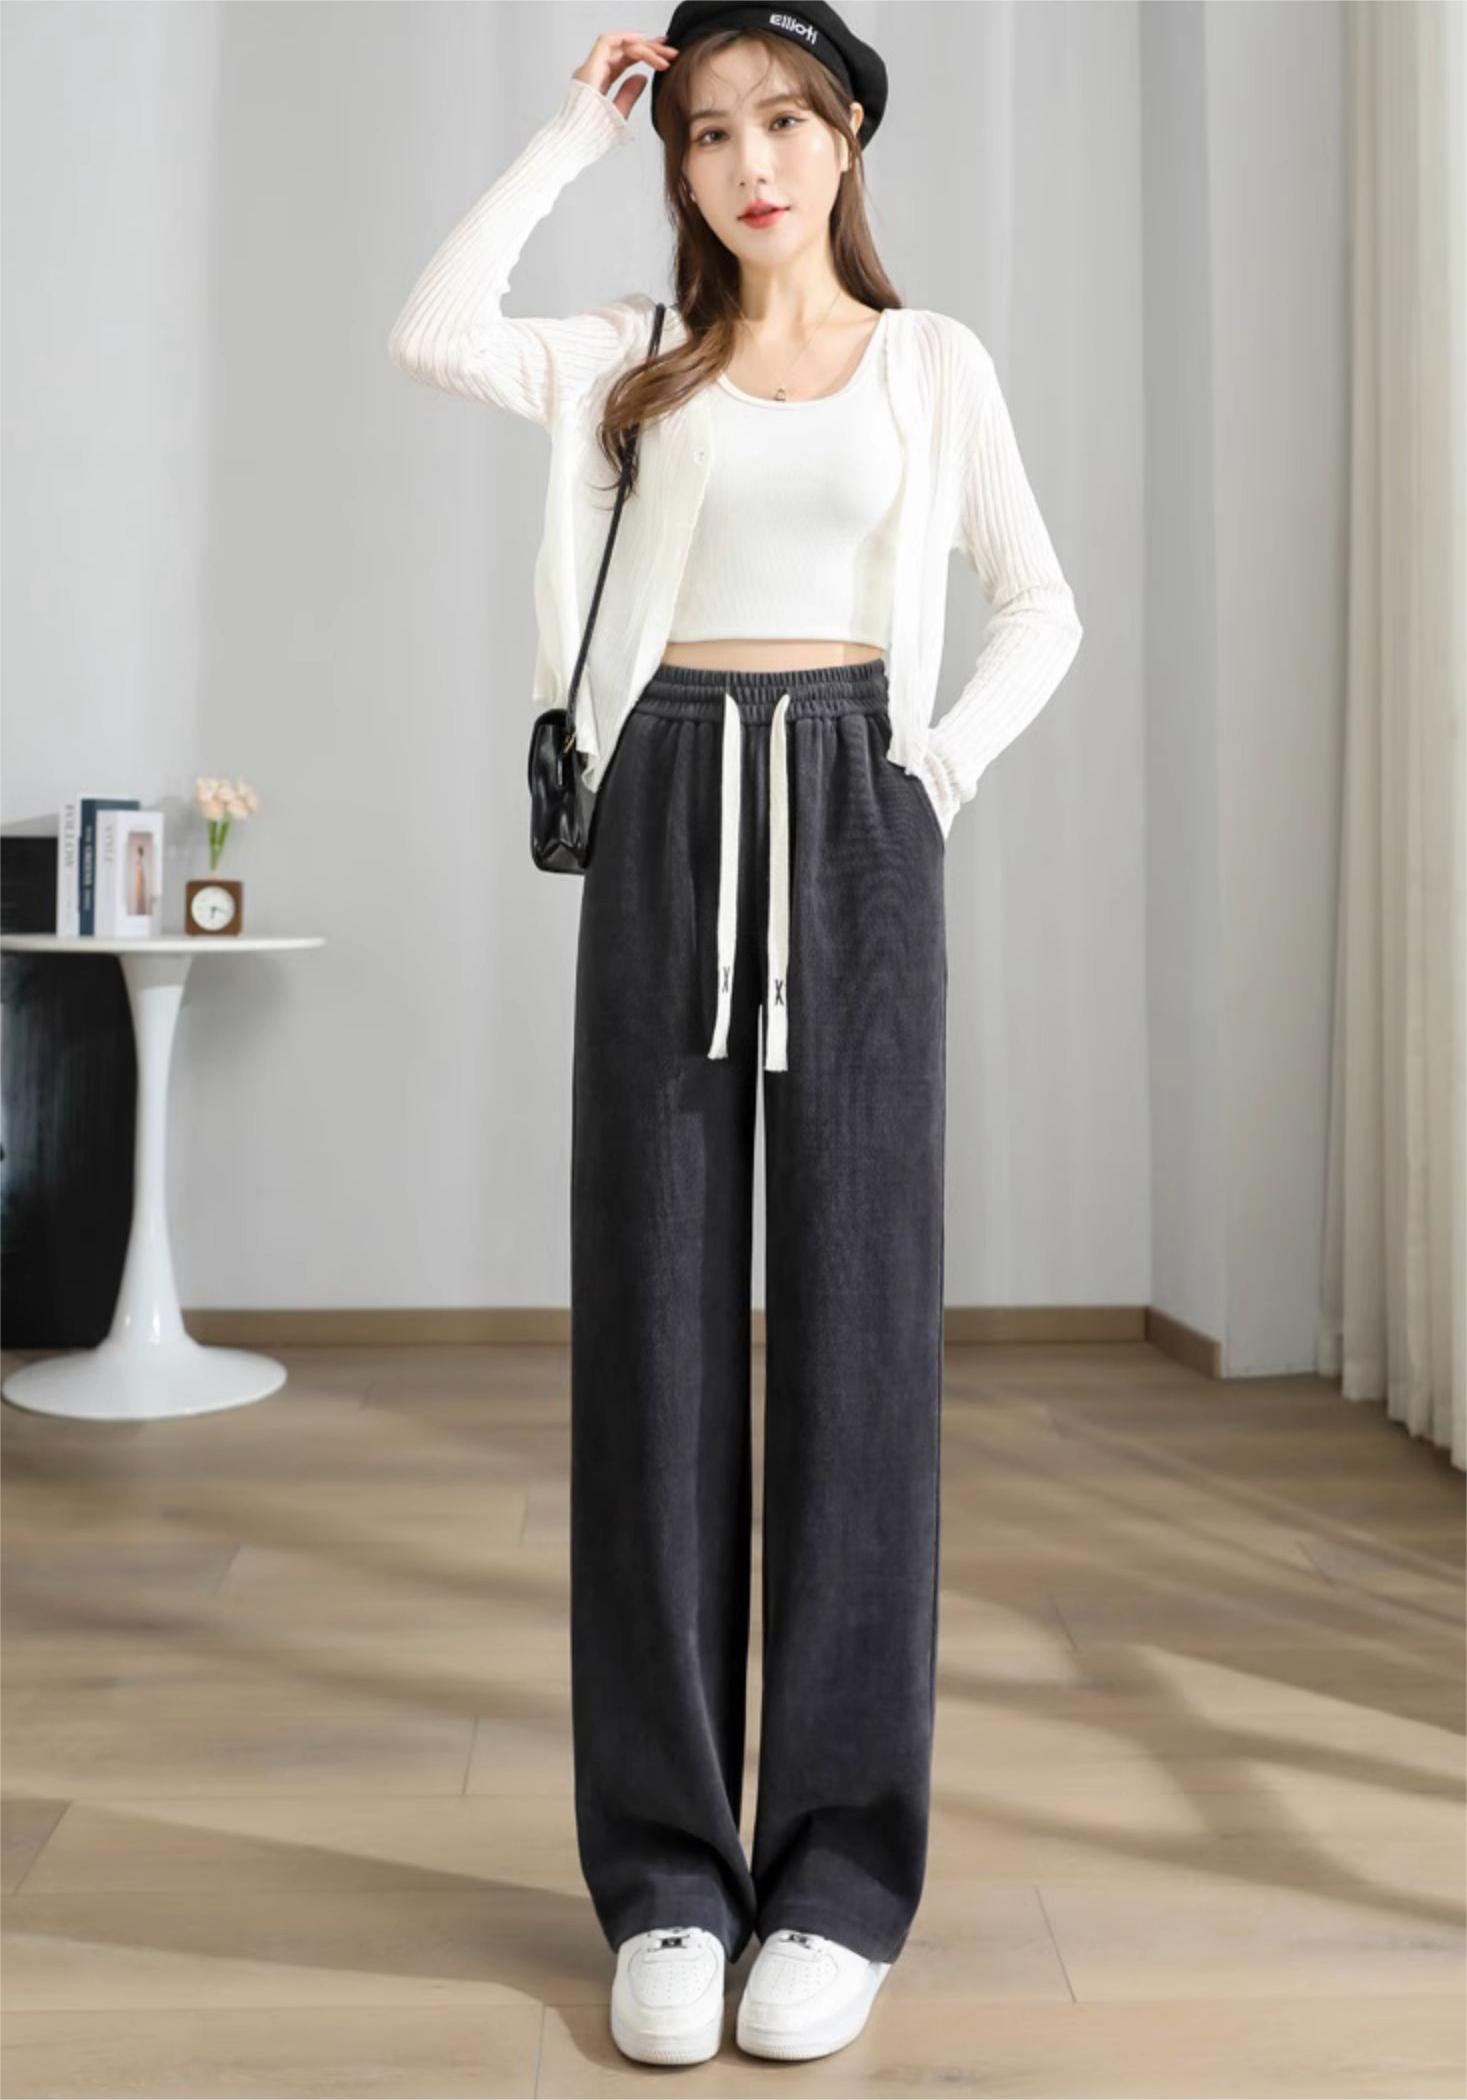 Autumn and winter thickened velvet and drapey chenille long wide-leg pants retro corduroy warm pants live supply